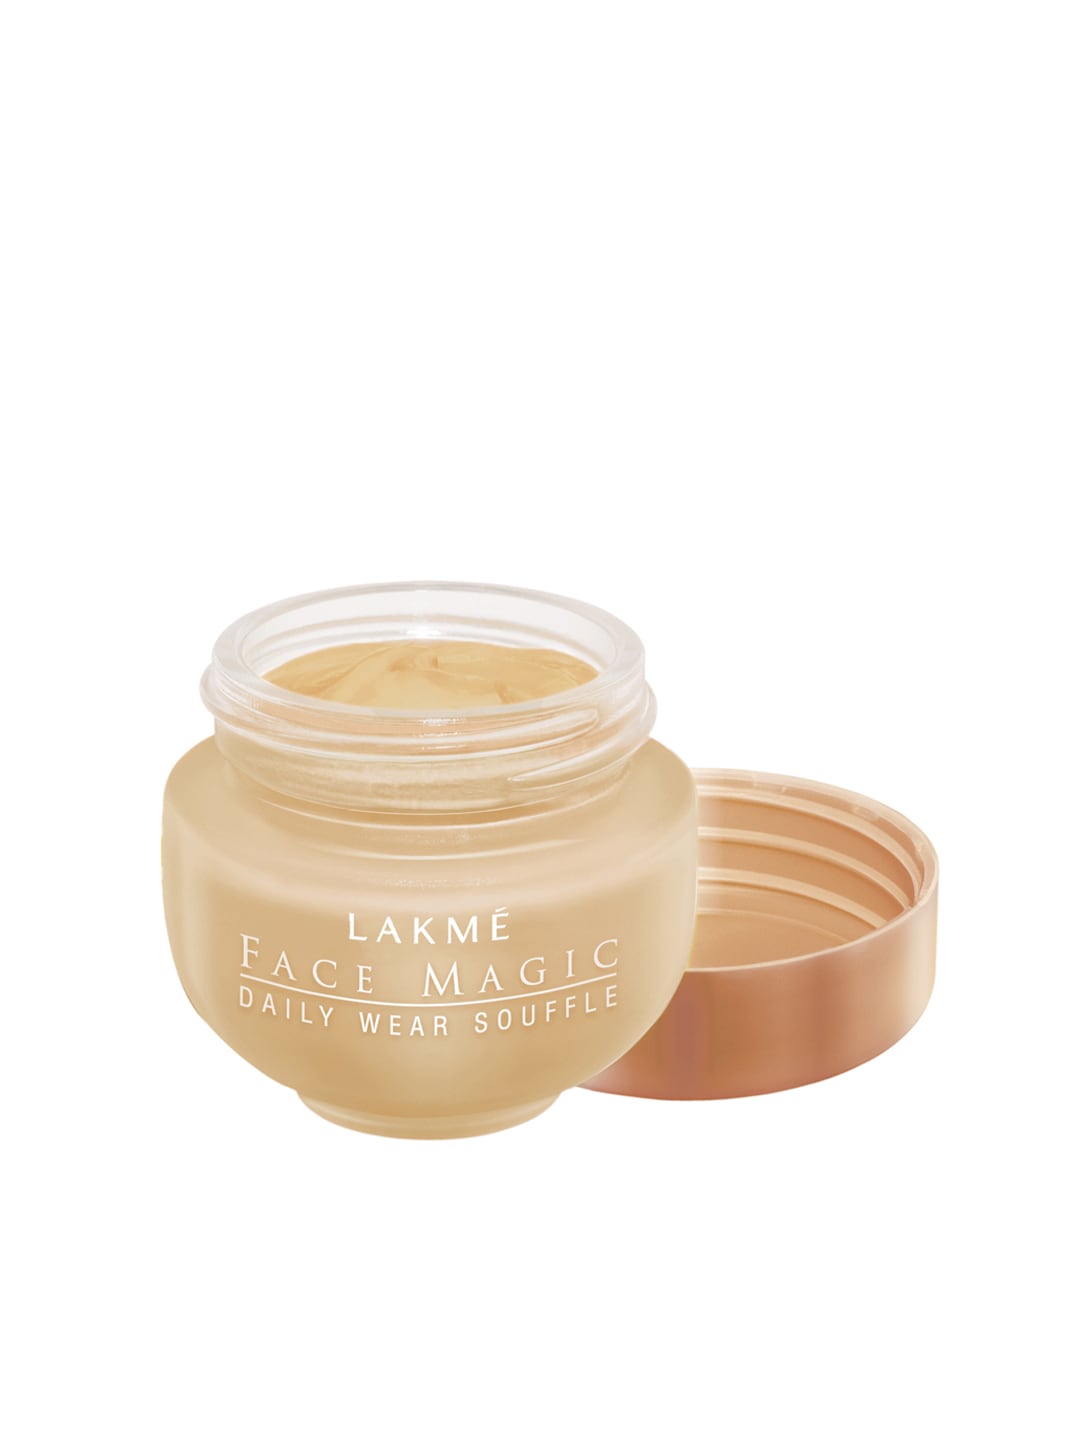 Lakme Face Magic Natural Marble Daily Wear Souffle